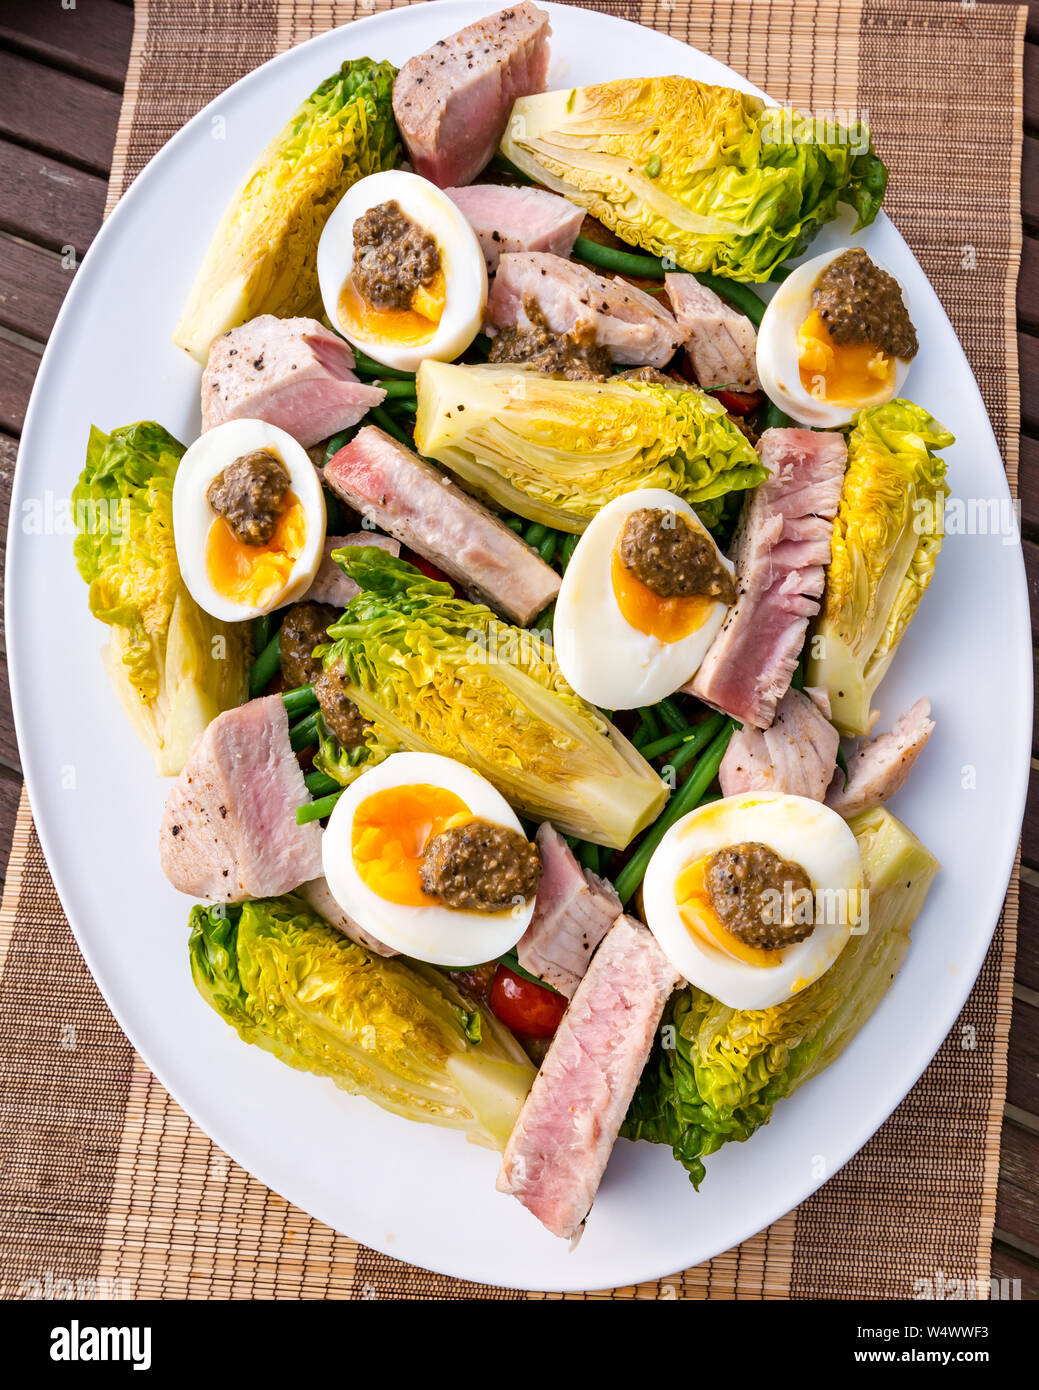 Version of salad Nicoise on white plate.  Hard boiled eggs and olive dressing, baby gem lettuce, boiled potatoes & tuna steak slices Stock Photo